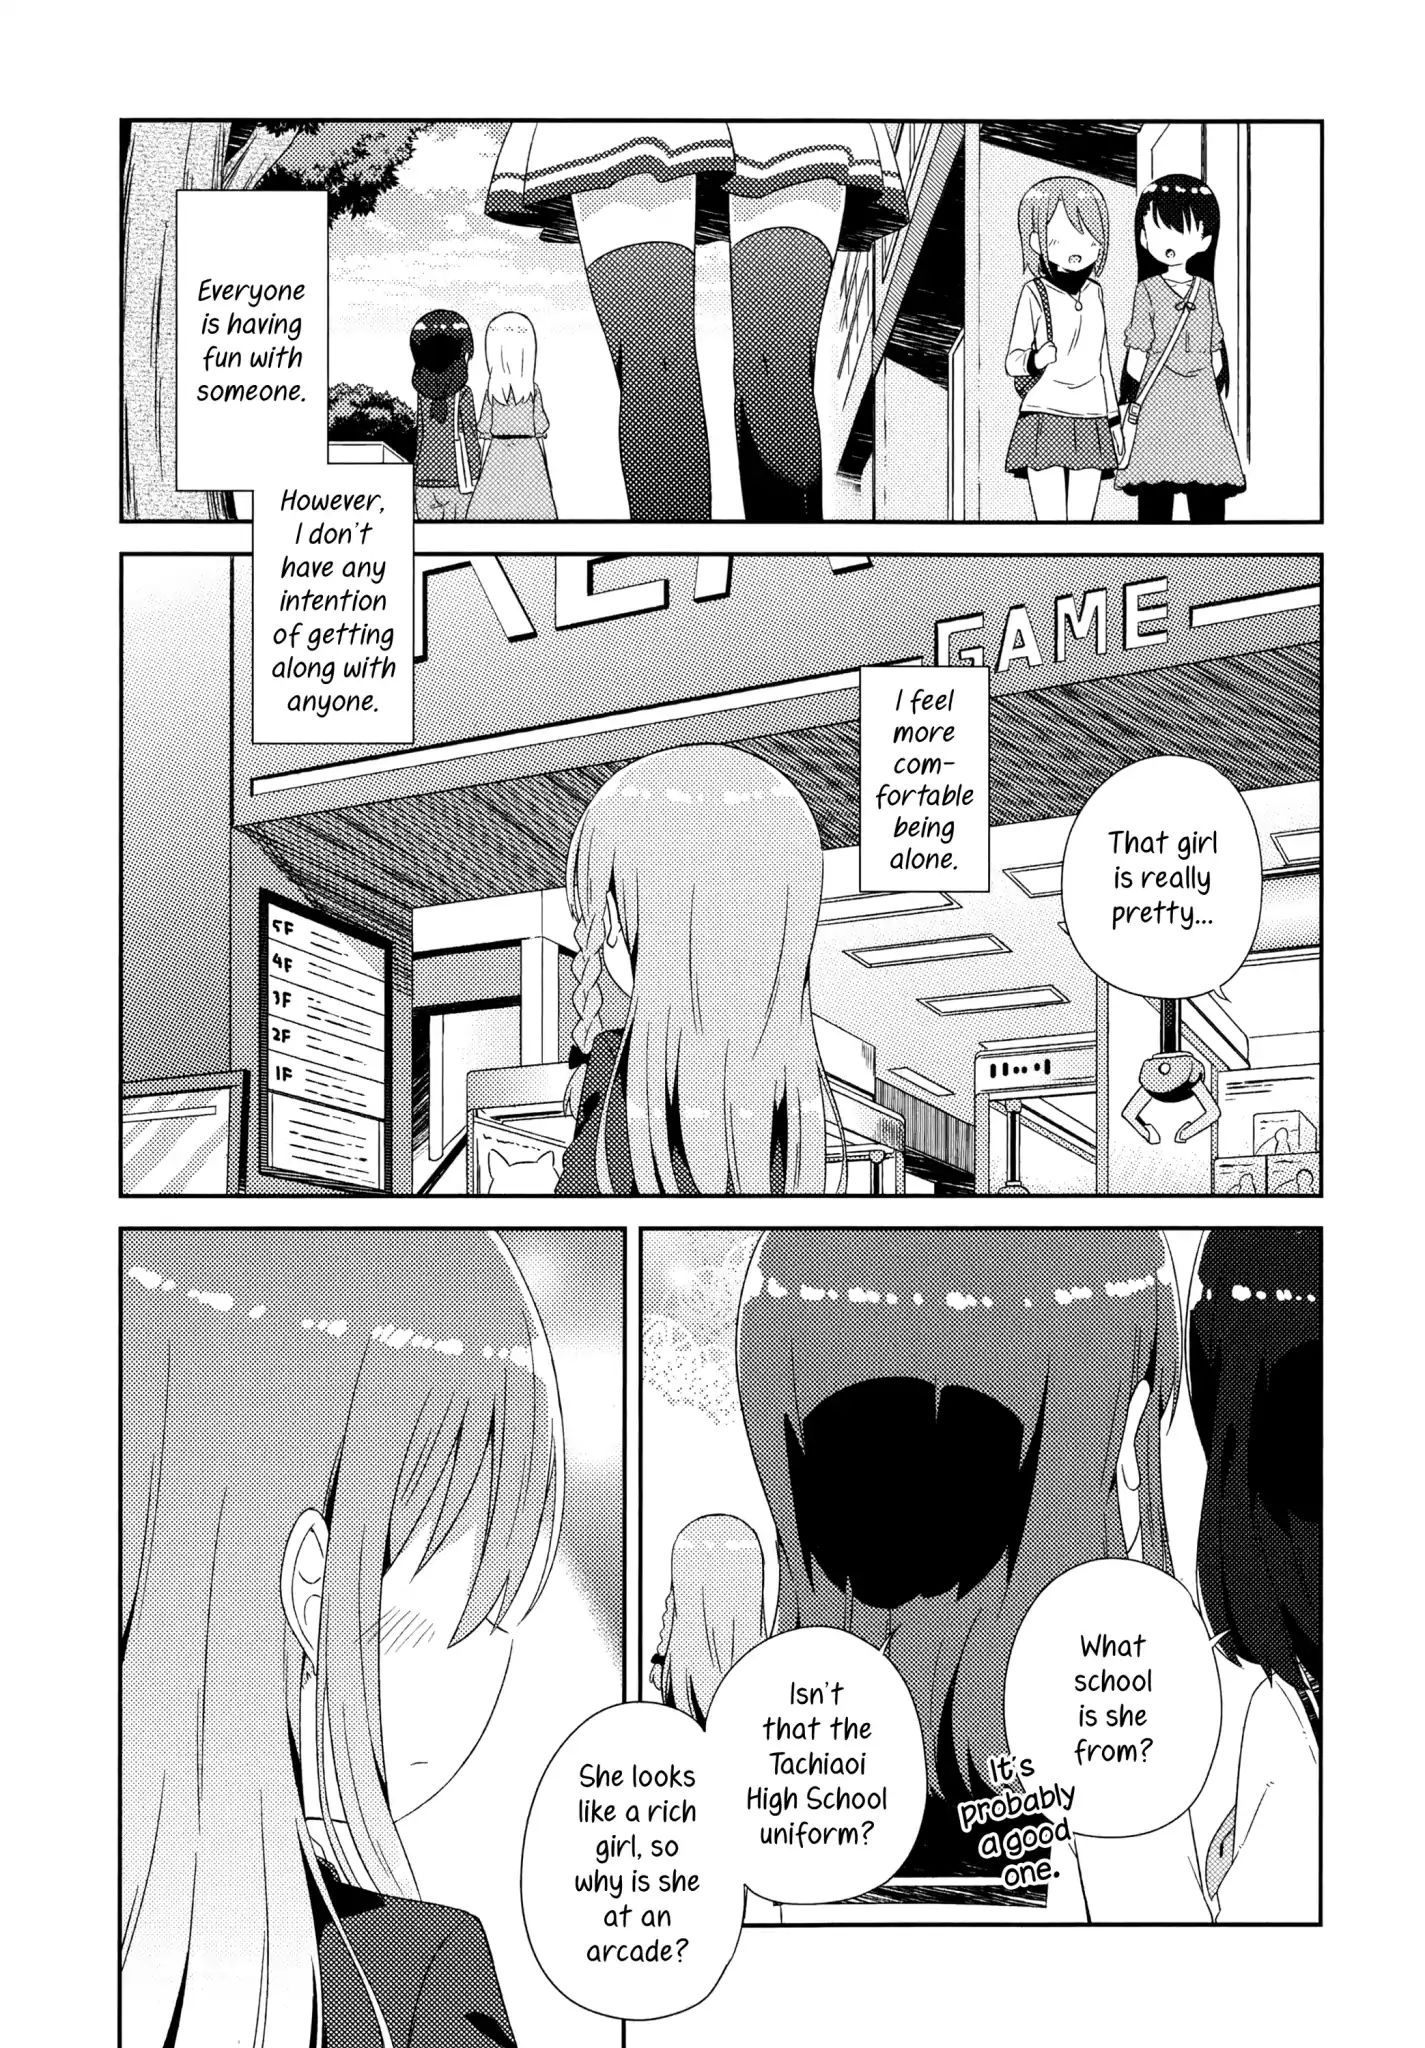 She Gets Girls Everyday. Vol.2 Chapter 8: The lady at the arcade